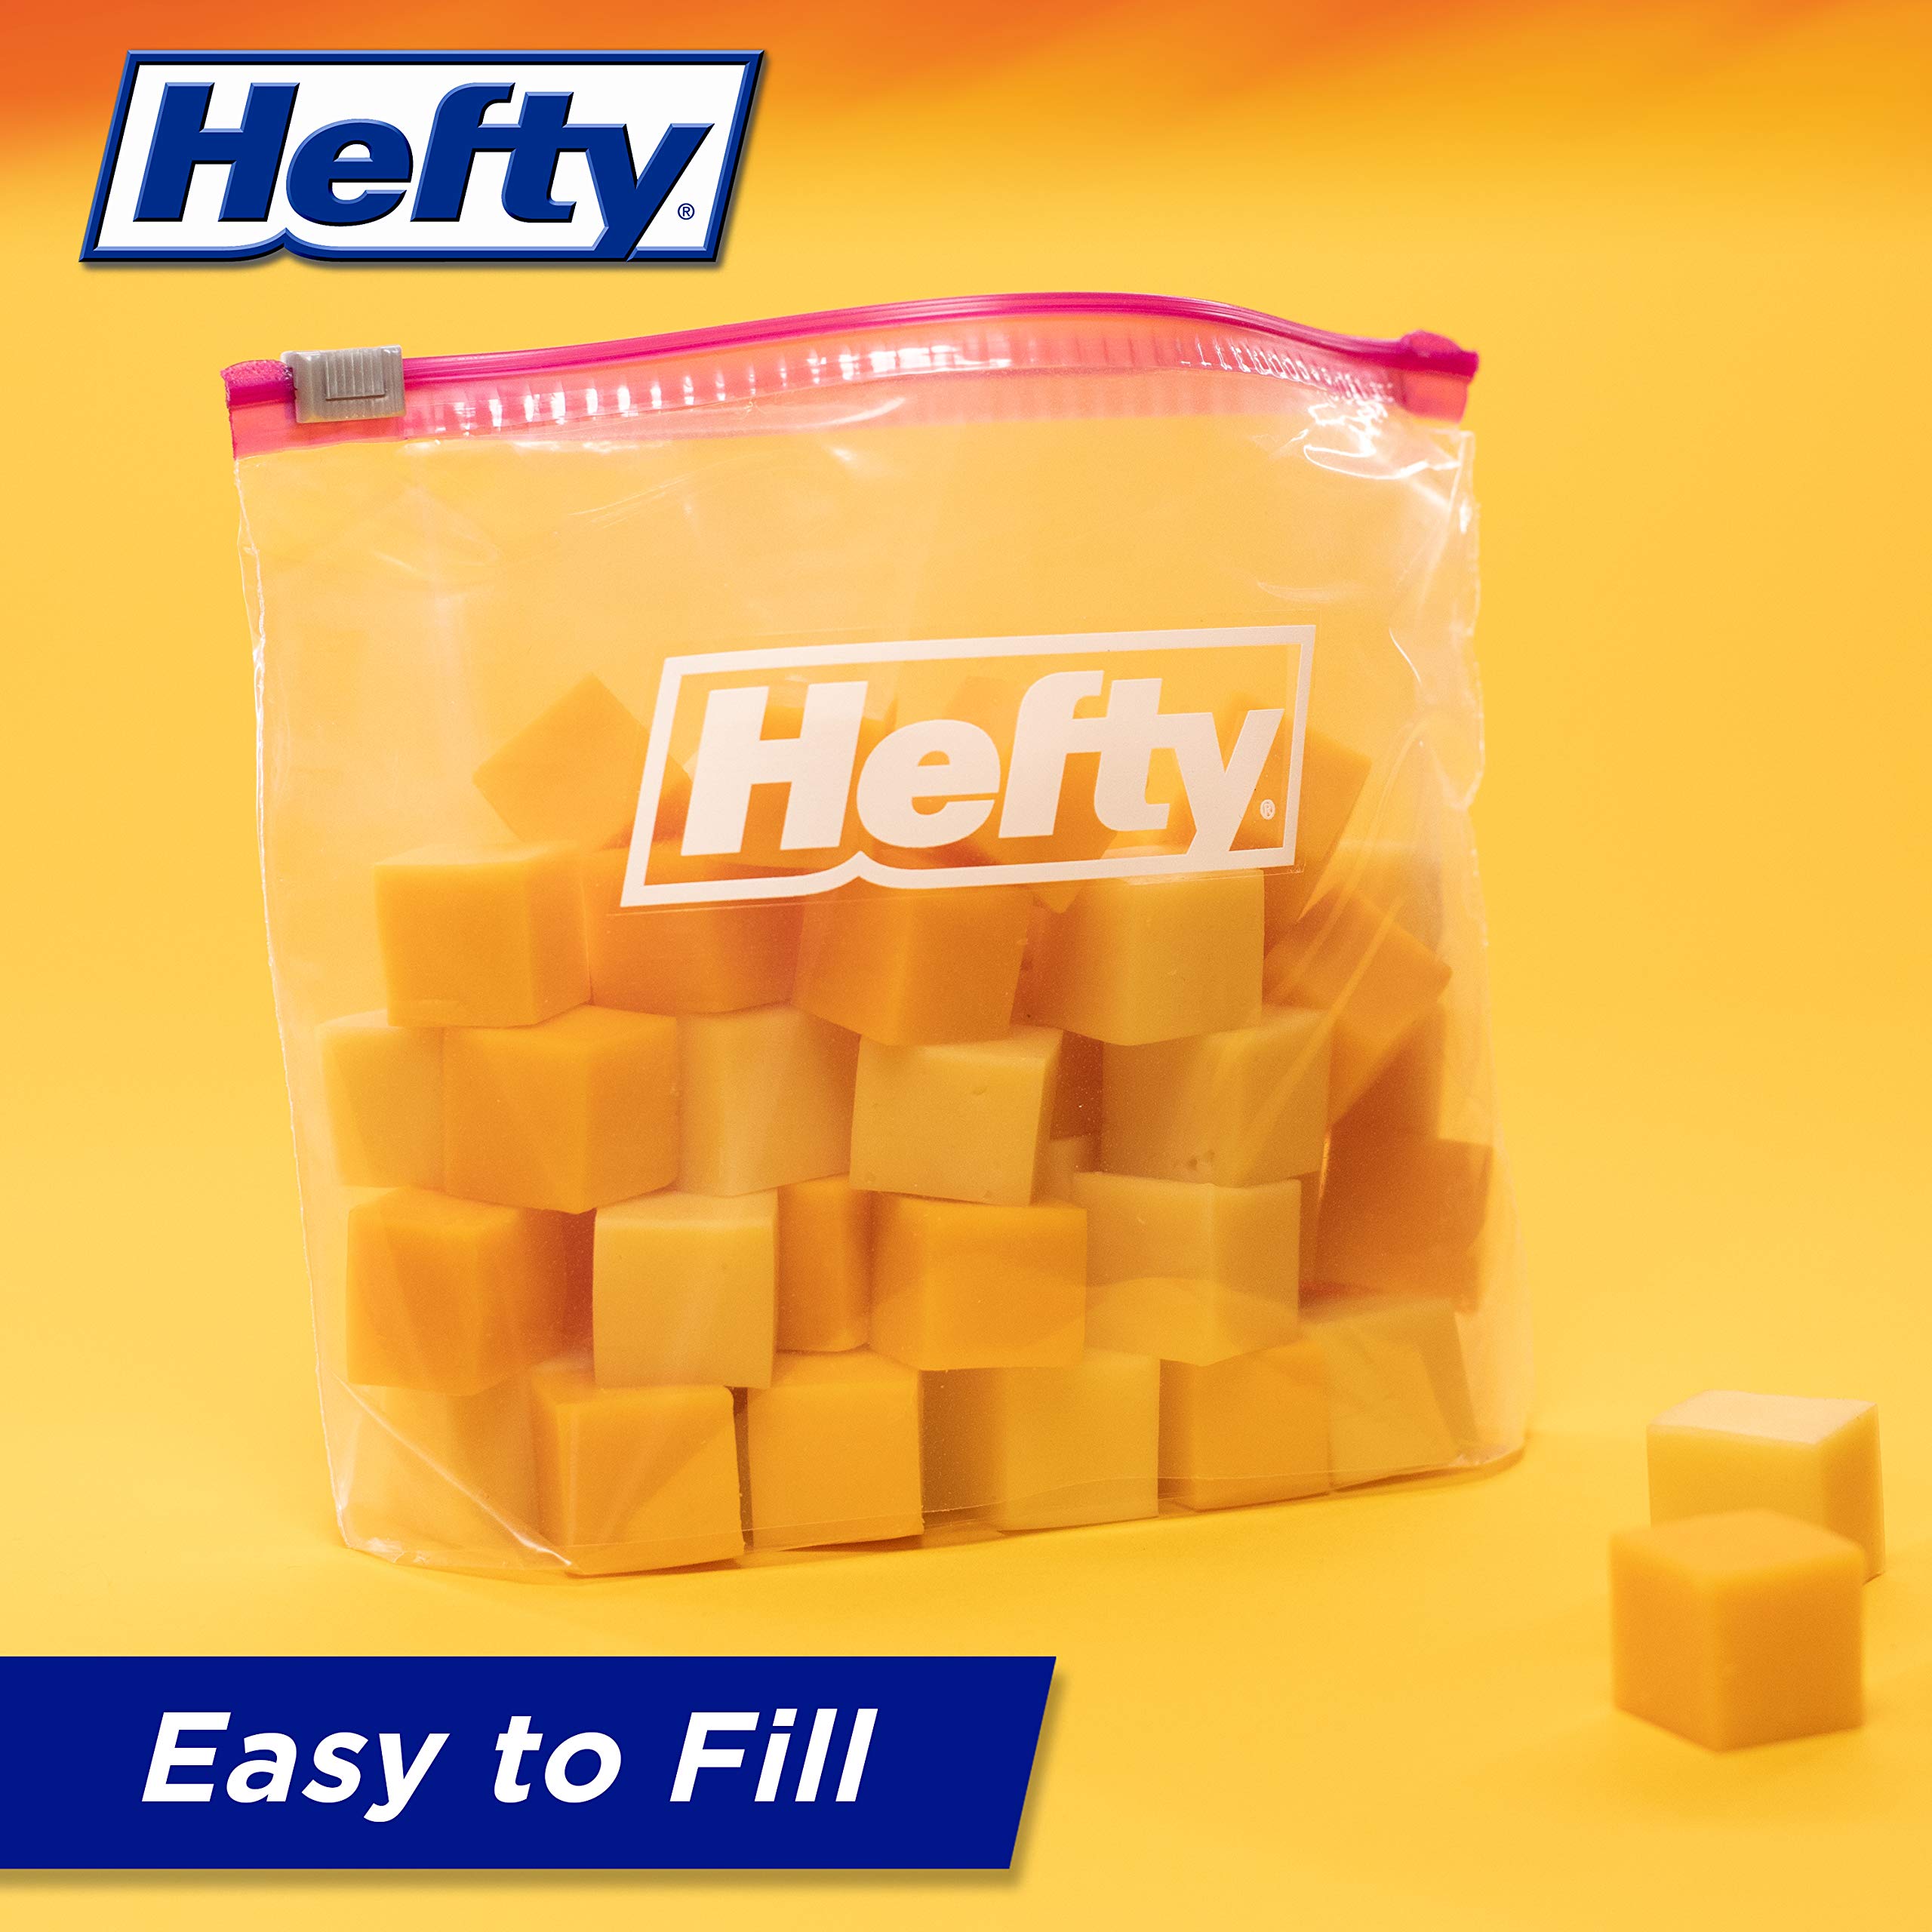 Hefty Slider Storage Bags, Gallon Size, 66 Count